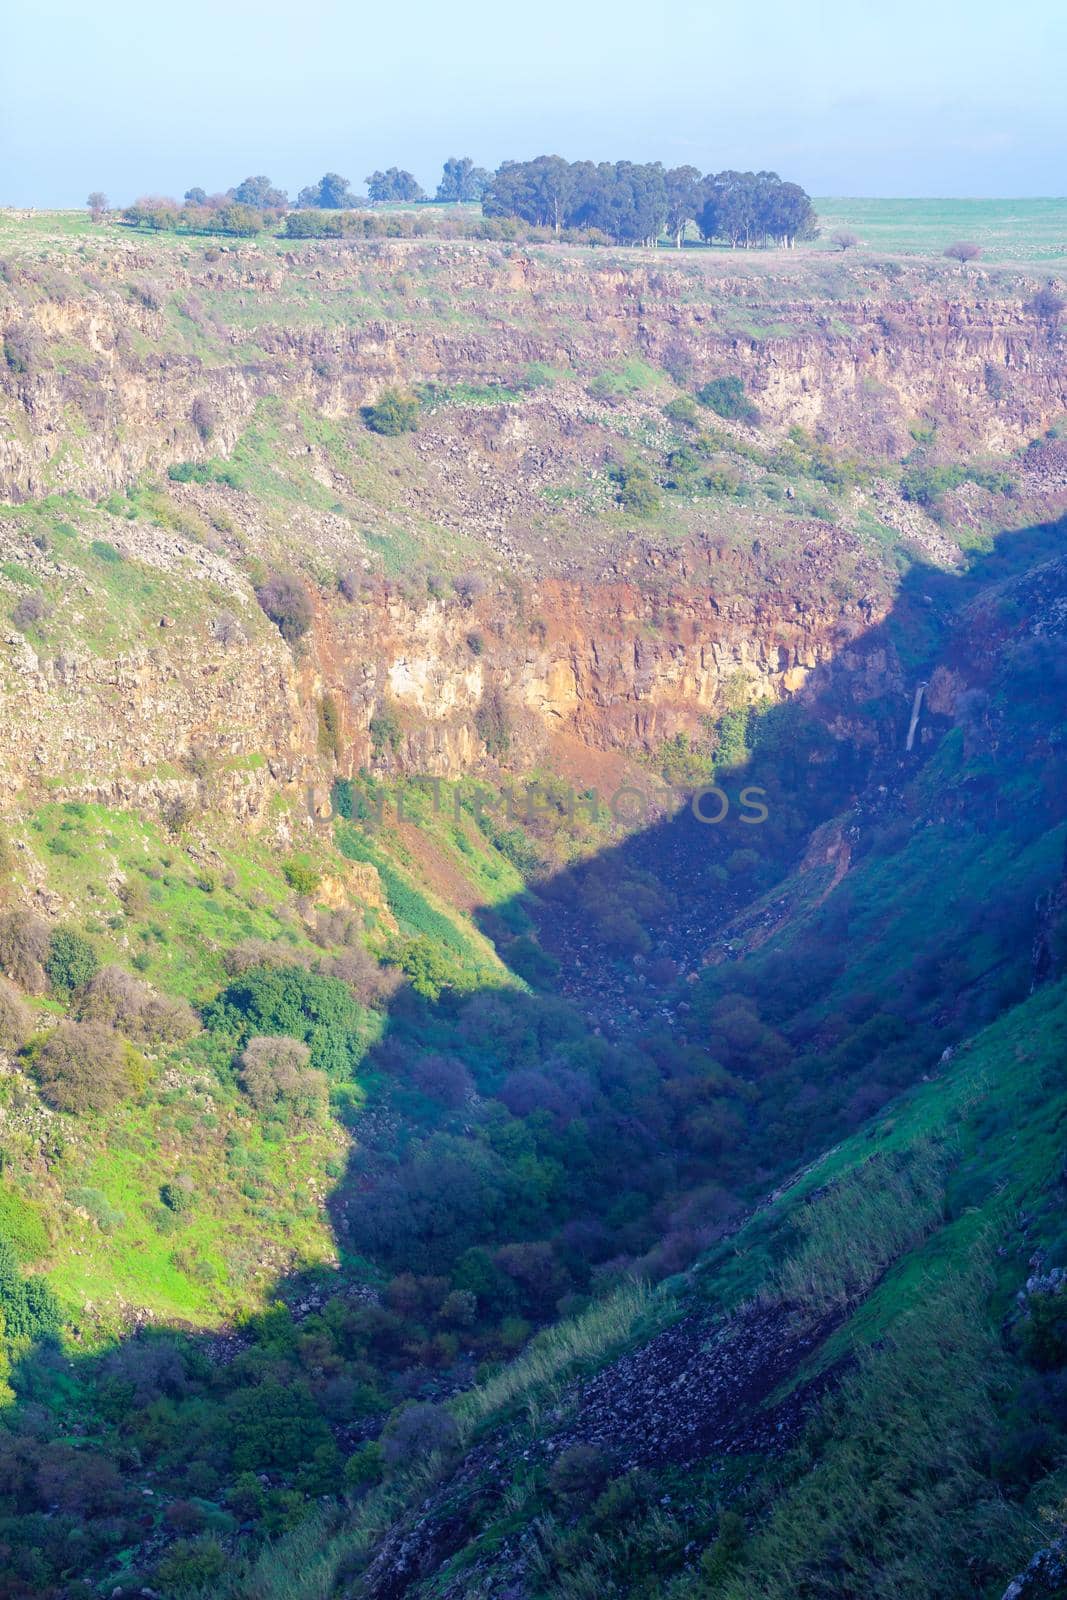 View of the Gamla waterfall (highest waterfall in Israel) and nearby landscape. The Golan Heights, Northern Israel